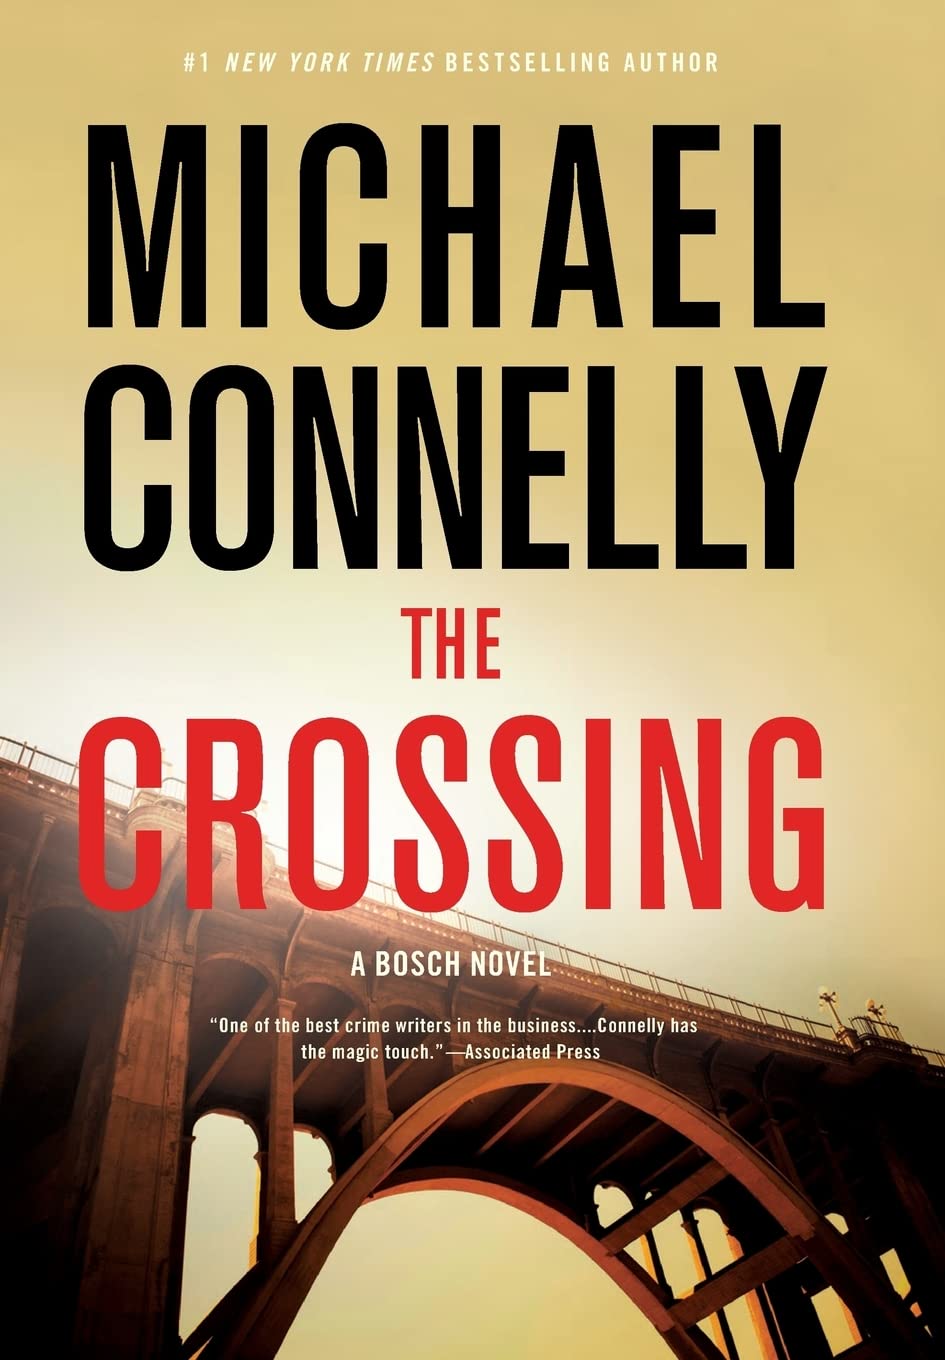 Michael Connelly: The Crossing (Harry Bosch, #18; Harry Bosch Universe, #27) (2015)